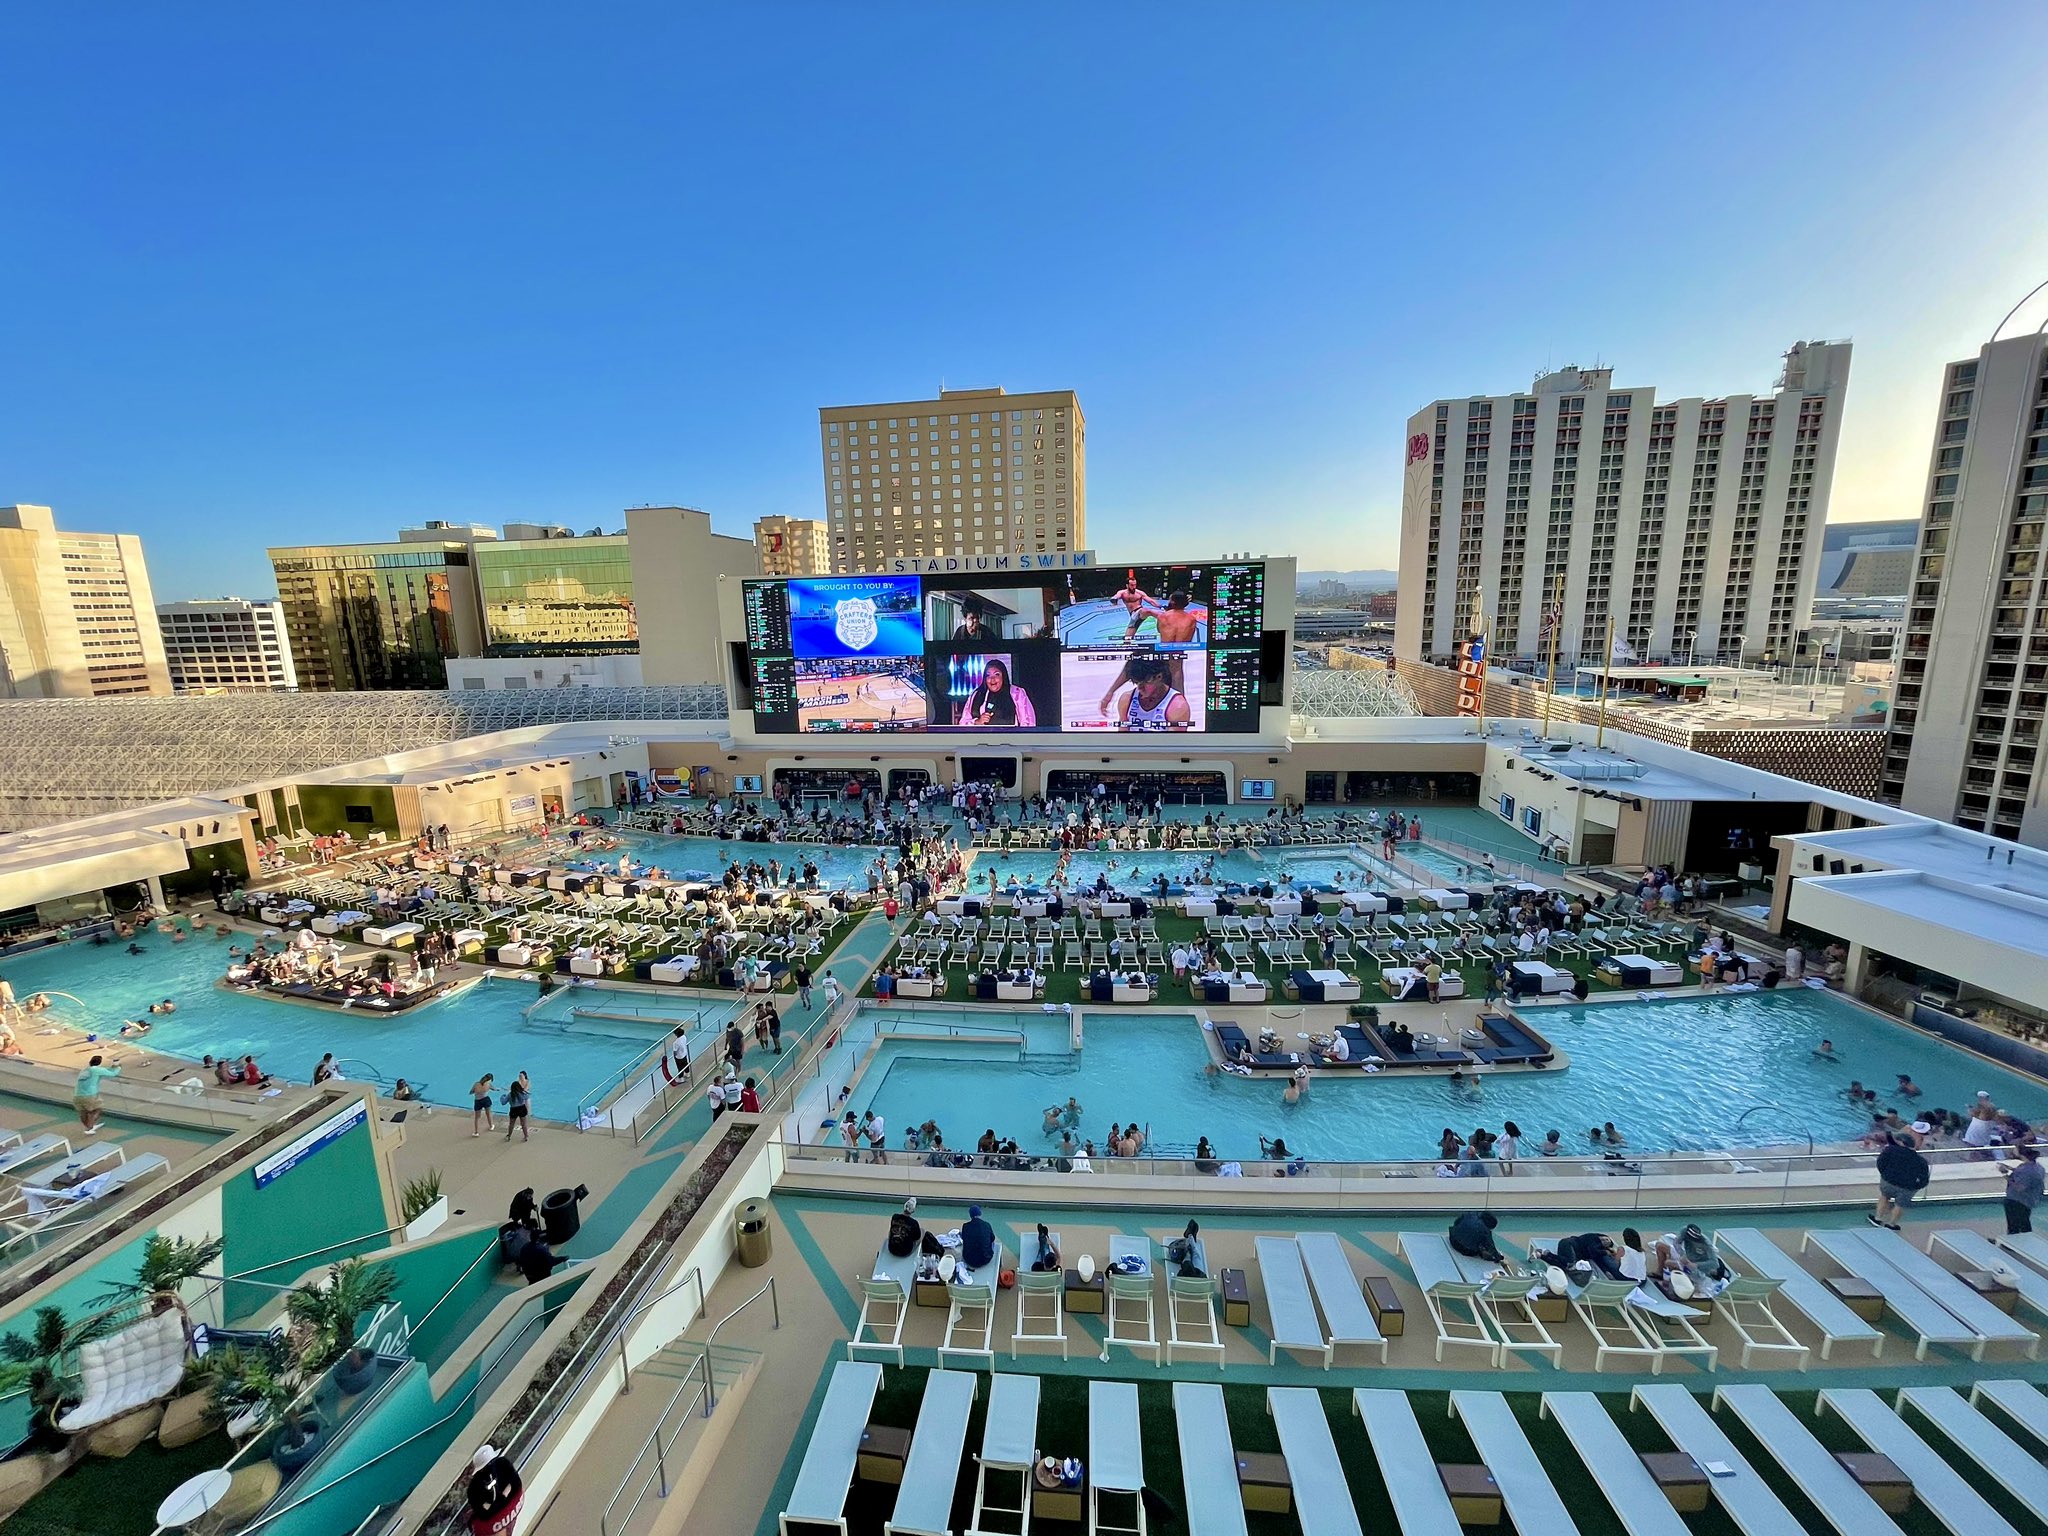 Which Hotel Has the Best Pool in Las Vegas?